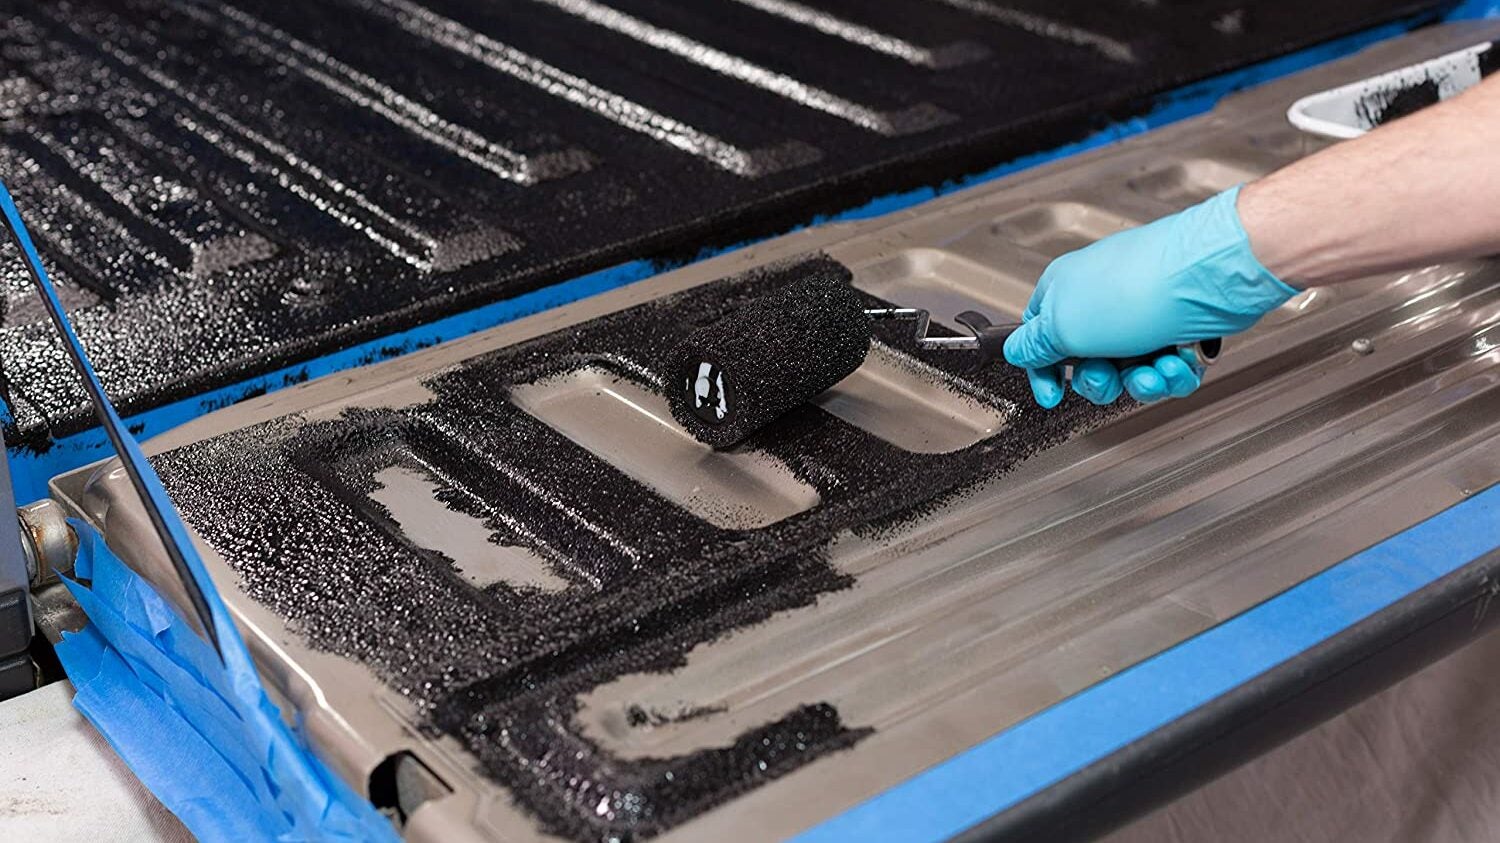 DIY Truck Bed Coating with Paint Roller 